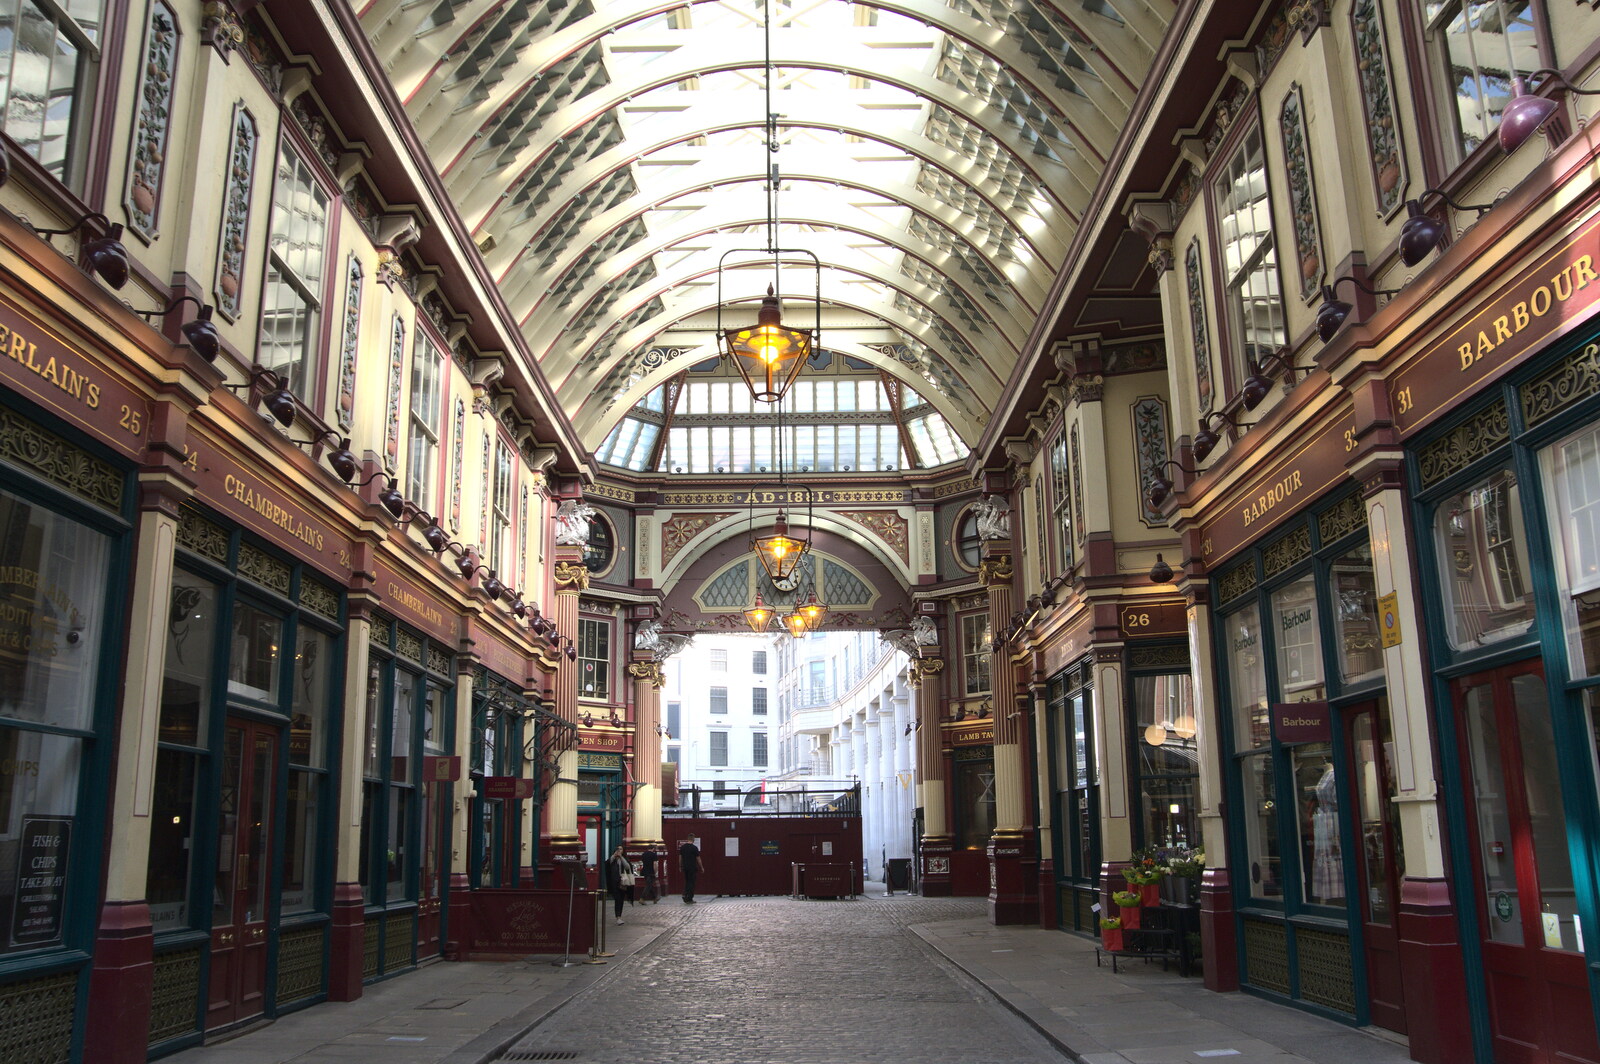 A Walk Around the South Bank, London - 25th March 2022: The grand Victorian Leadenhall Market arcade